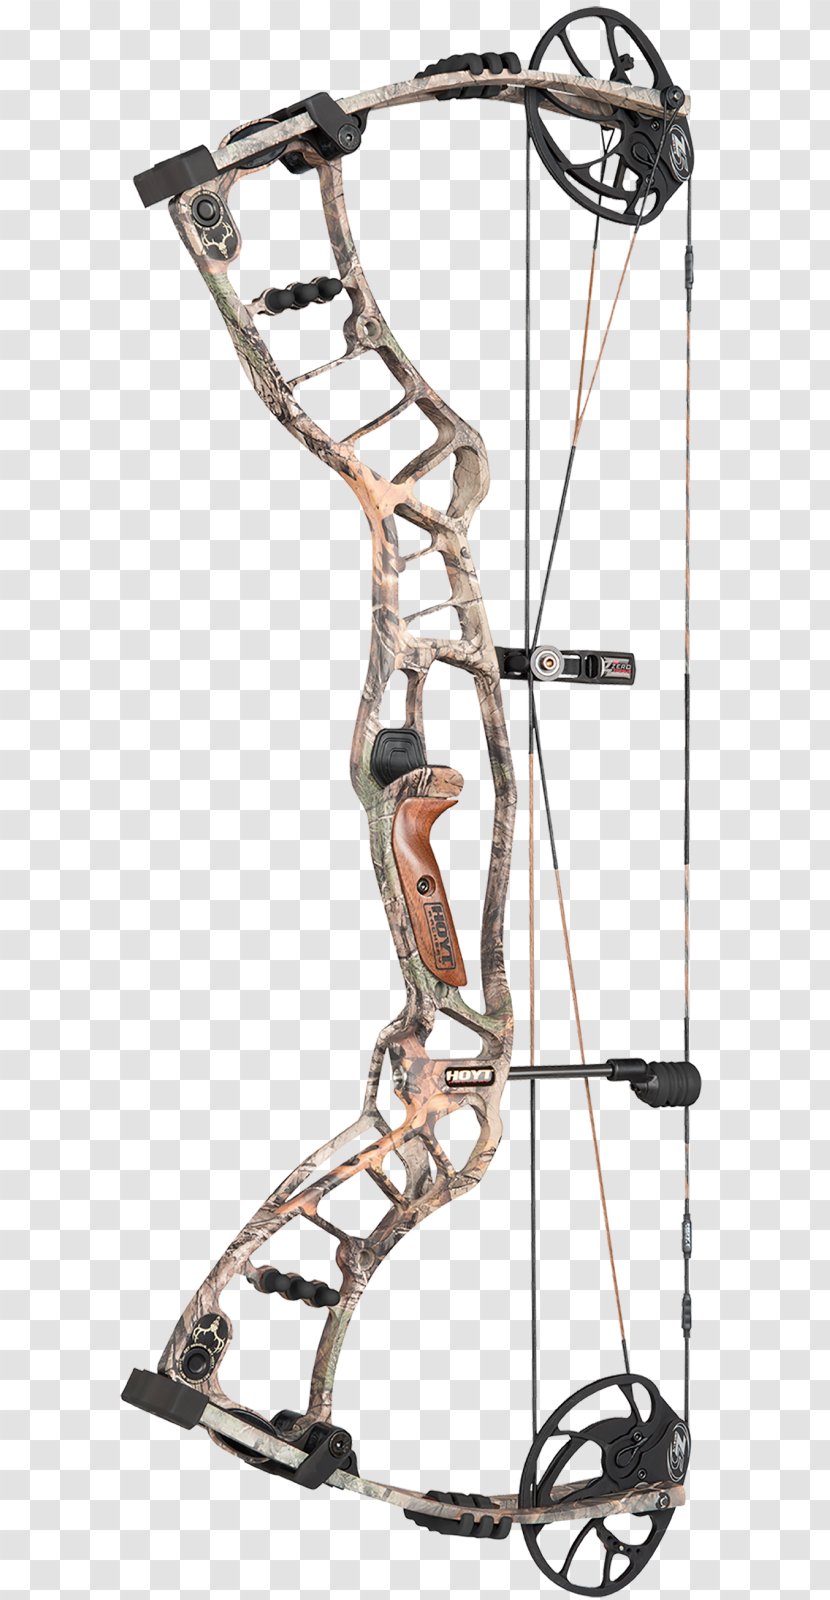 Compound Bows Archery Bow And Arrow Bowhunting Transparent PNG